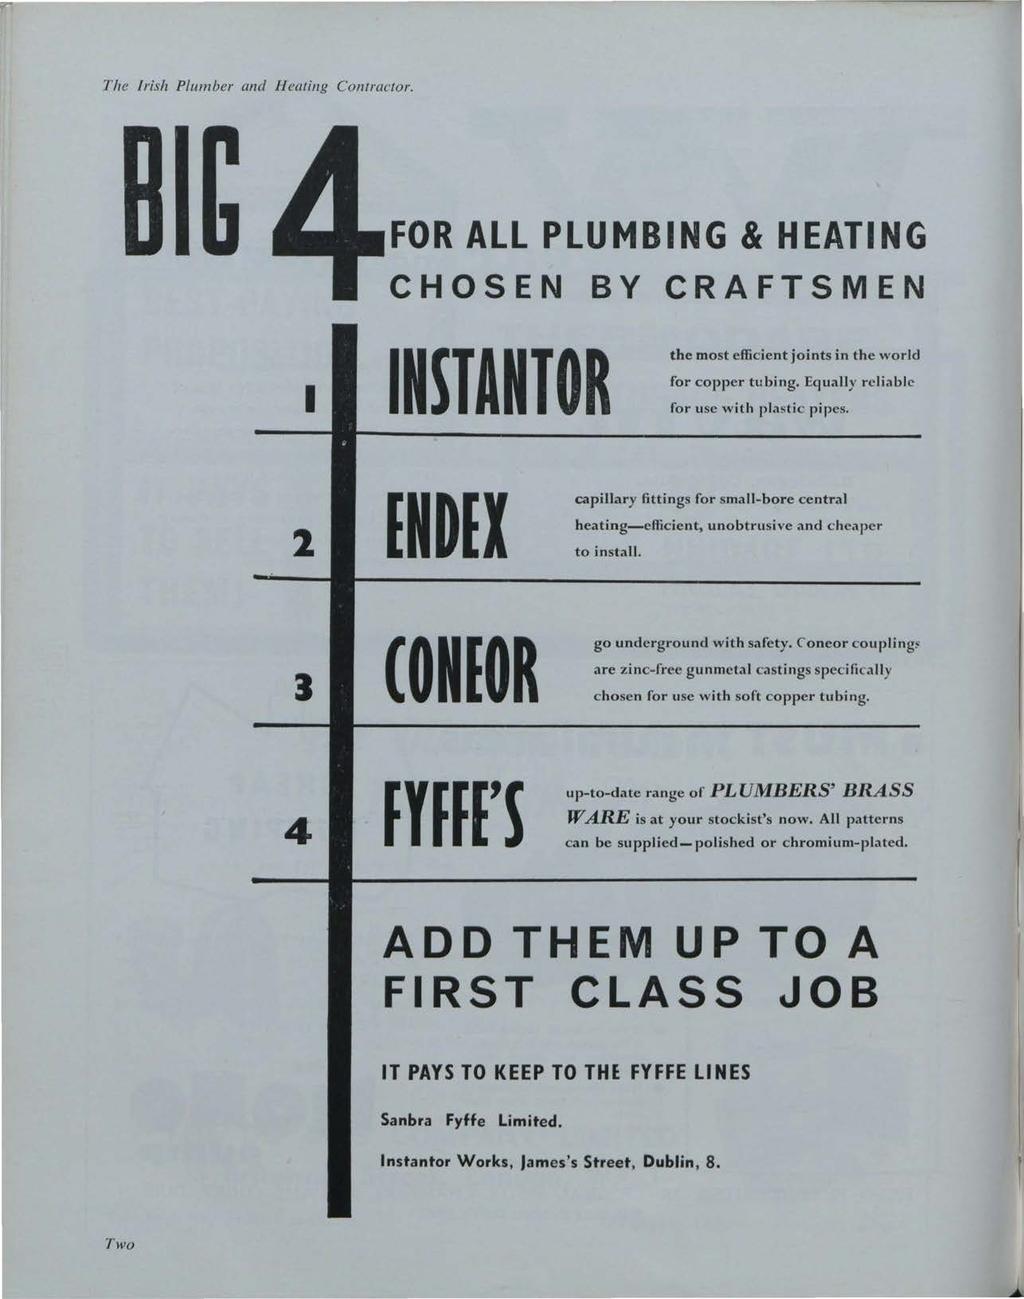 Building Services News, Vol. 2, Iss. 12 [1963], Art. 1 The Irish Plumber and H eating Contractor.